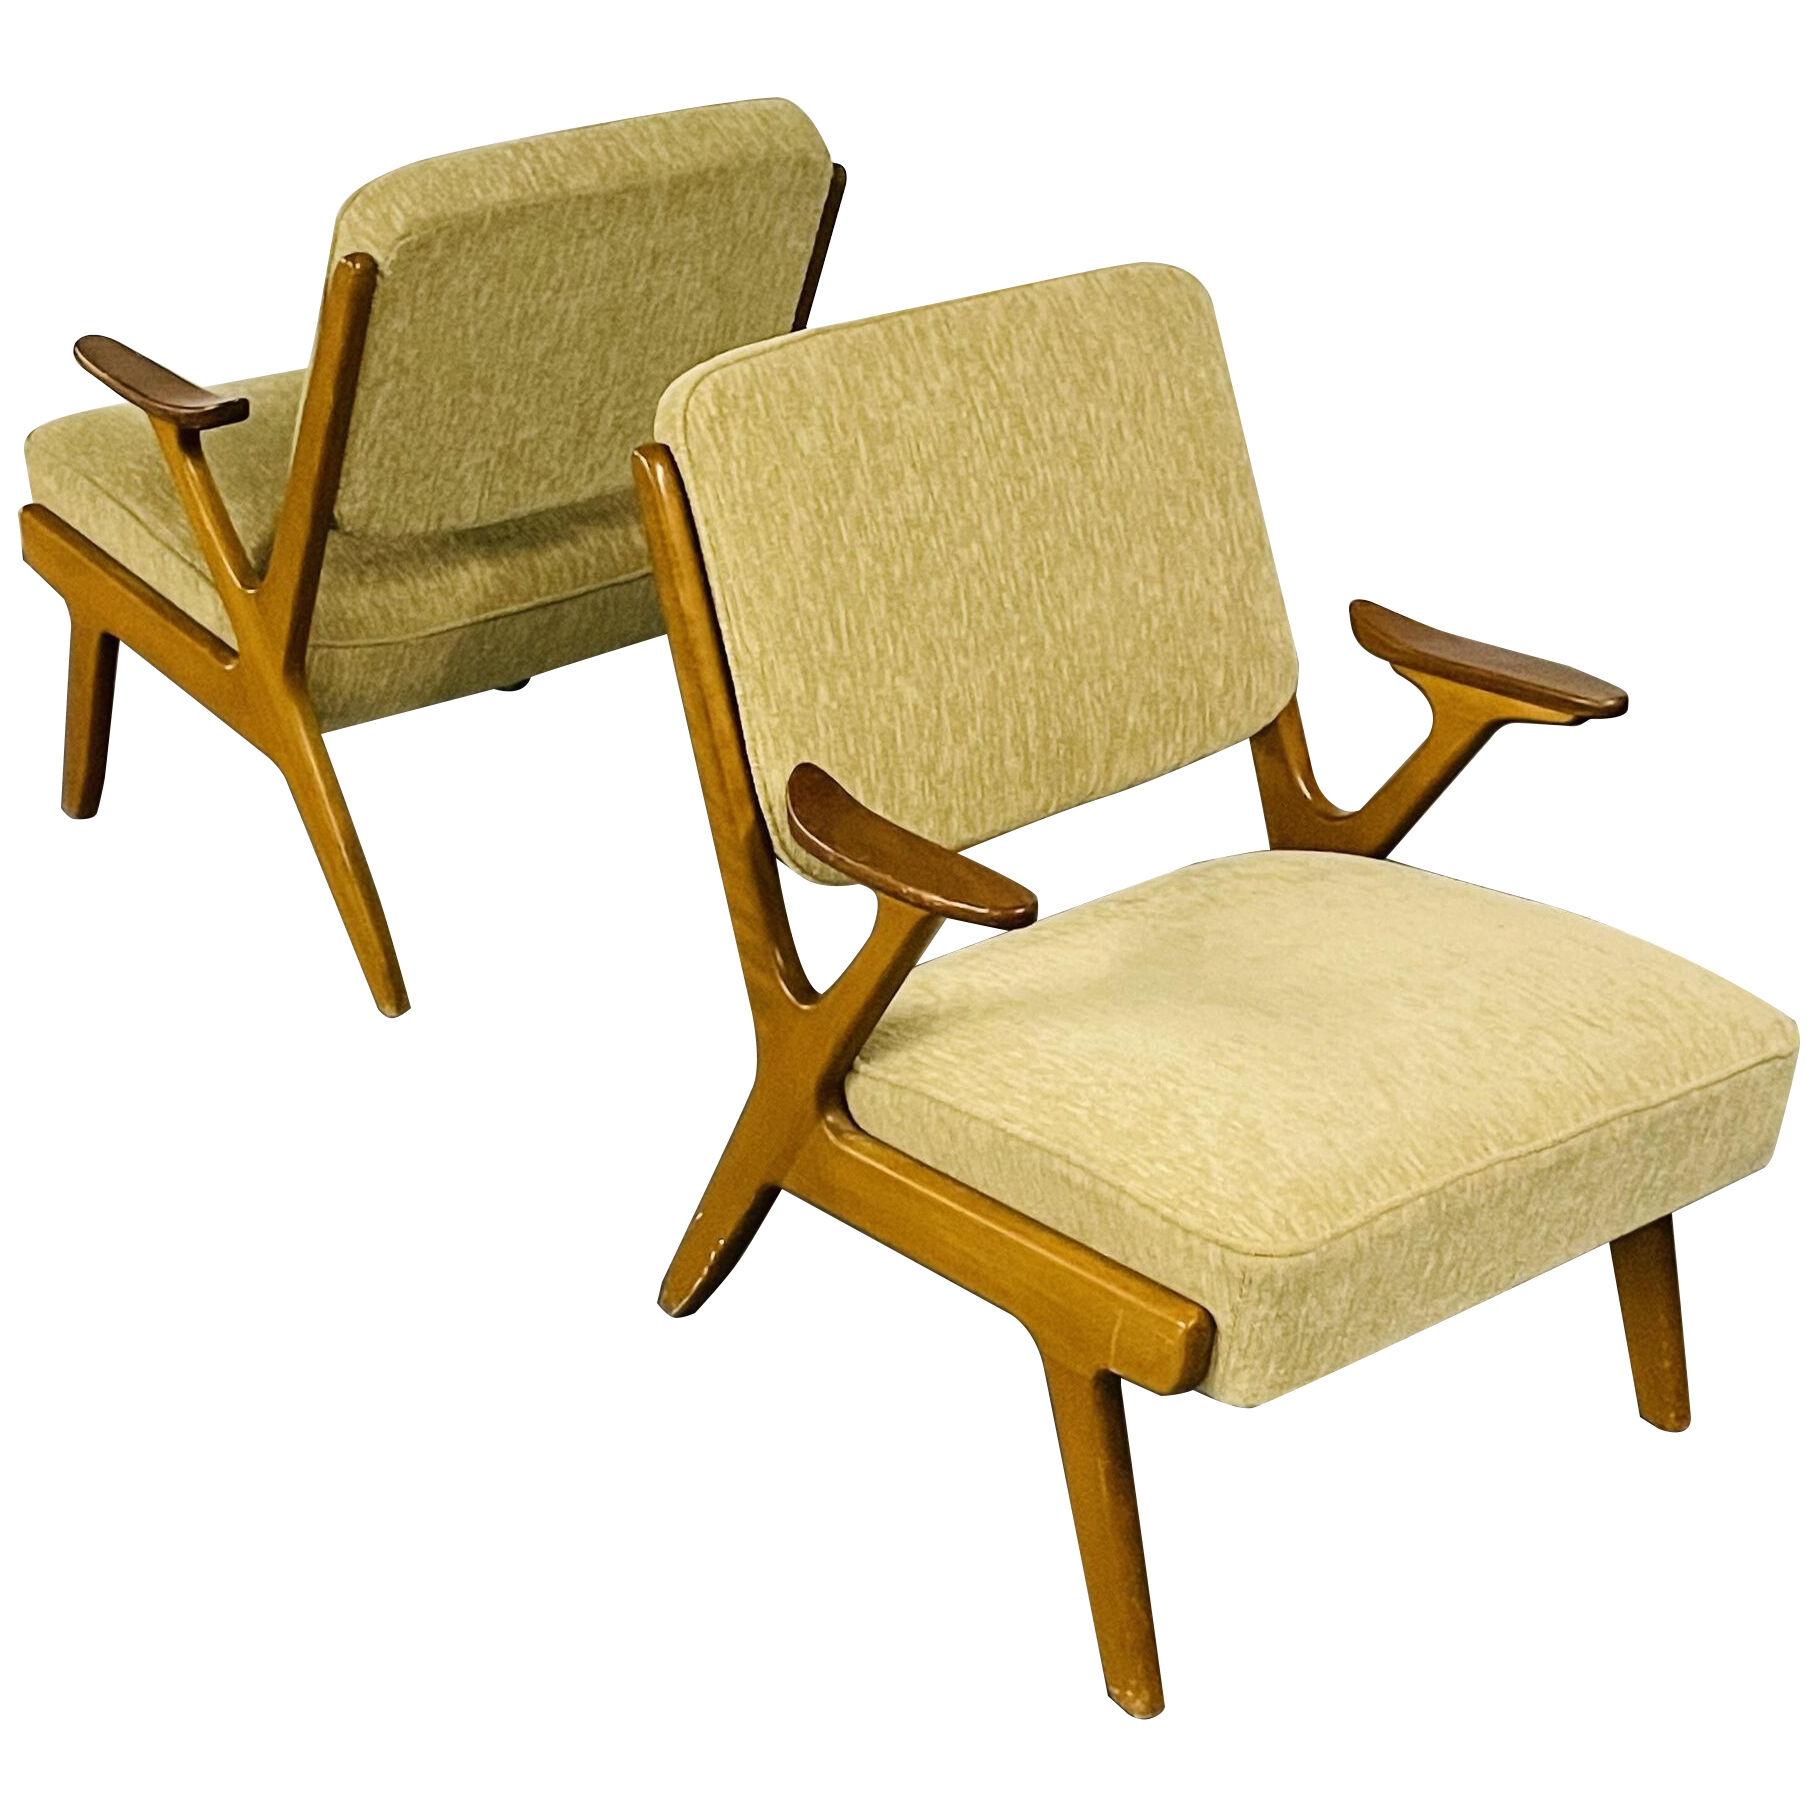 Pair of Mid-Century Modern Easy / Lounge / Arm Chairs, Sweden, 1960s, S. Makaryd